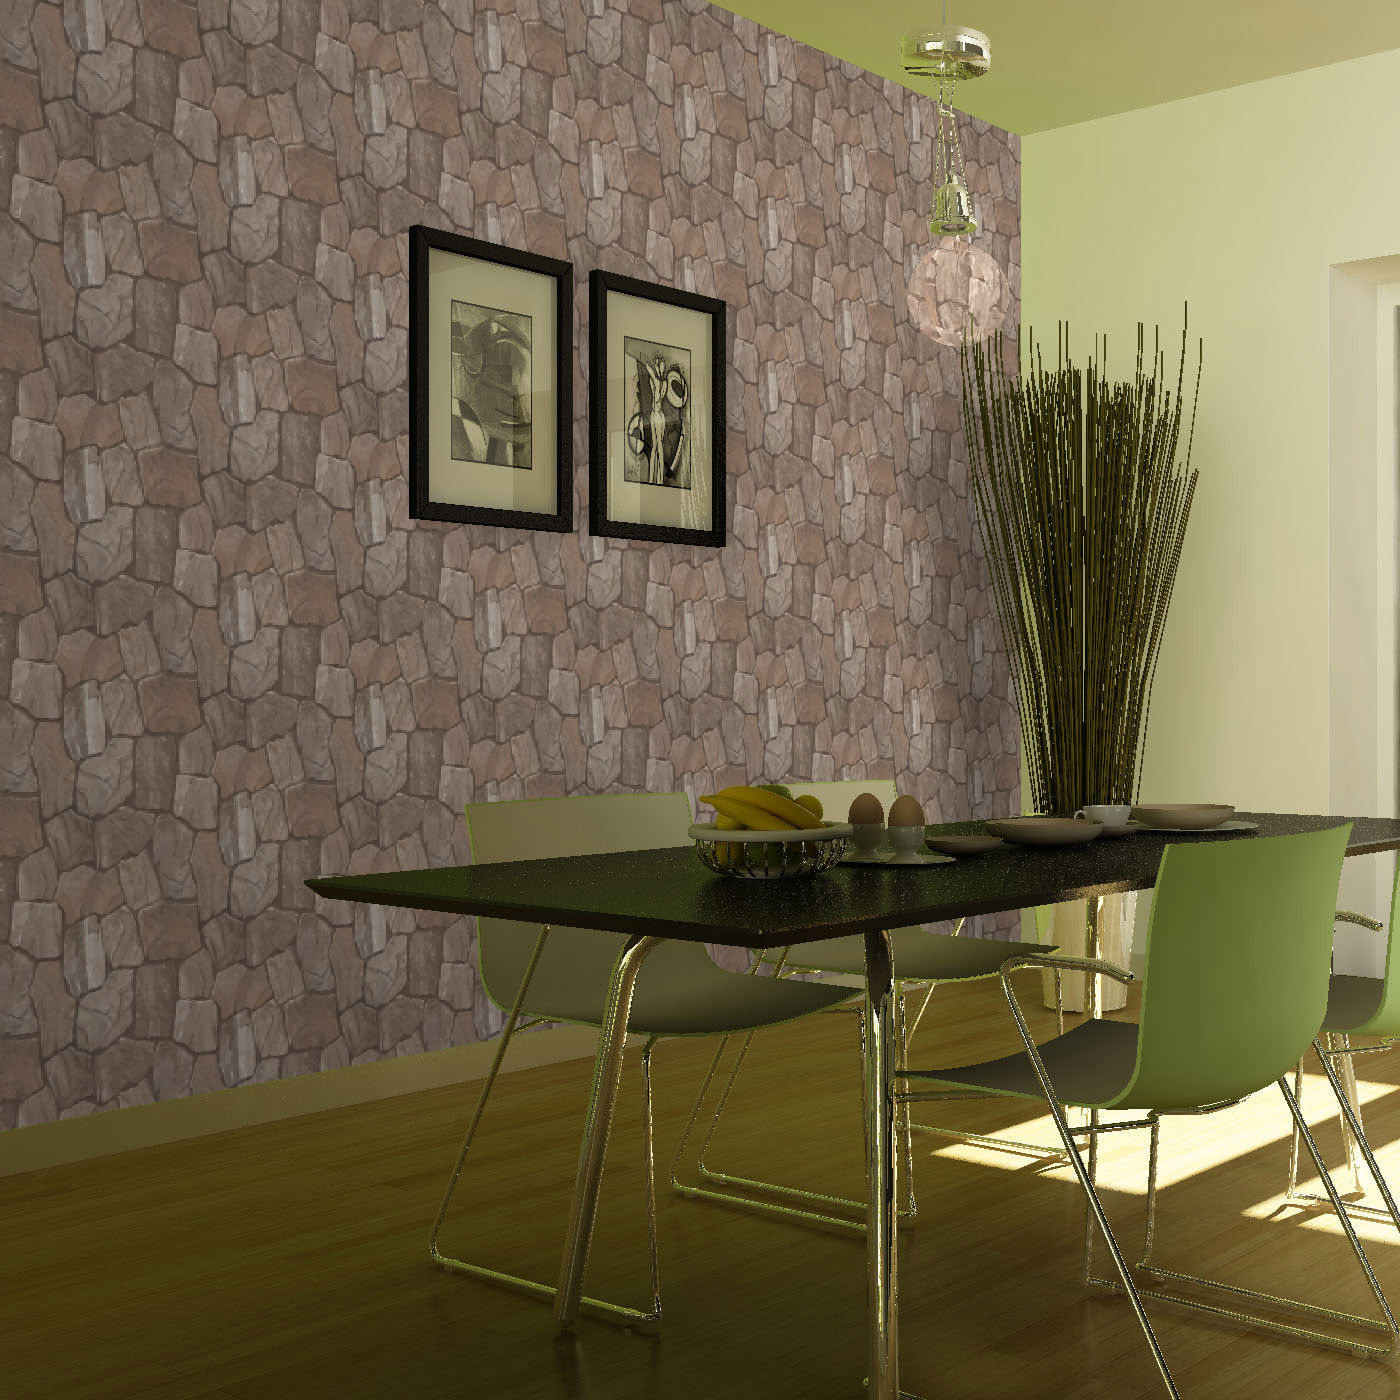  Wall Brick Stone Textured wallpaper KitchenLiving Roomfireplace wall